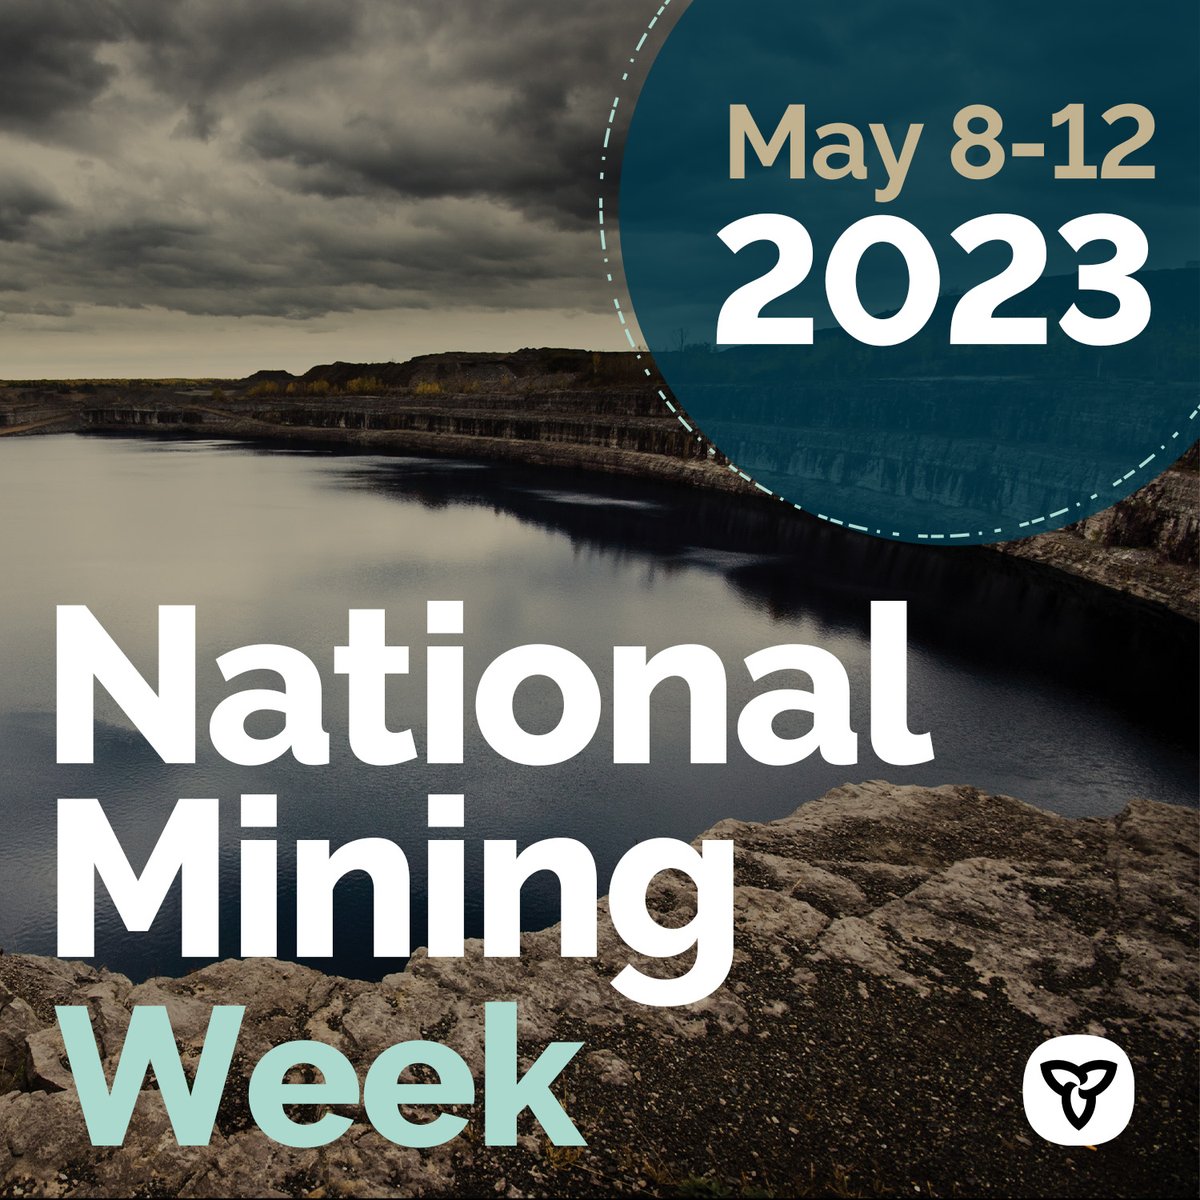 During #NationalMiningWeek, let's celebrate the mining sector in Ontario. The Building More Mines Act, if passed, will help us build more mines to secure the supply chain for the critical minerals we need for the electric vehicle revolution.